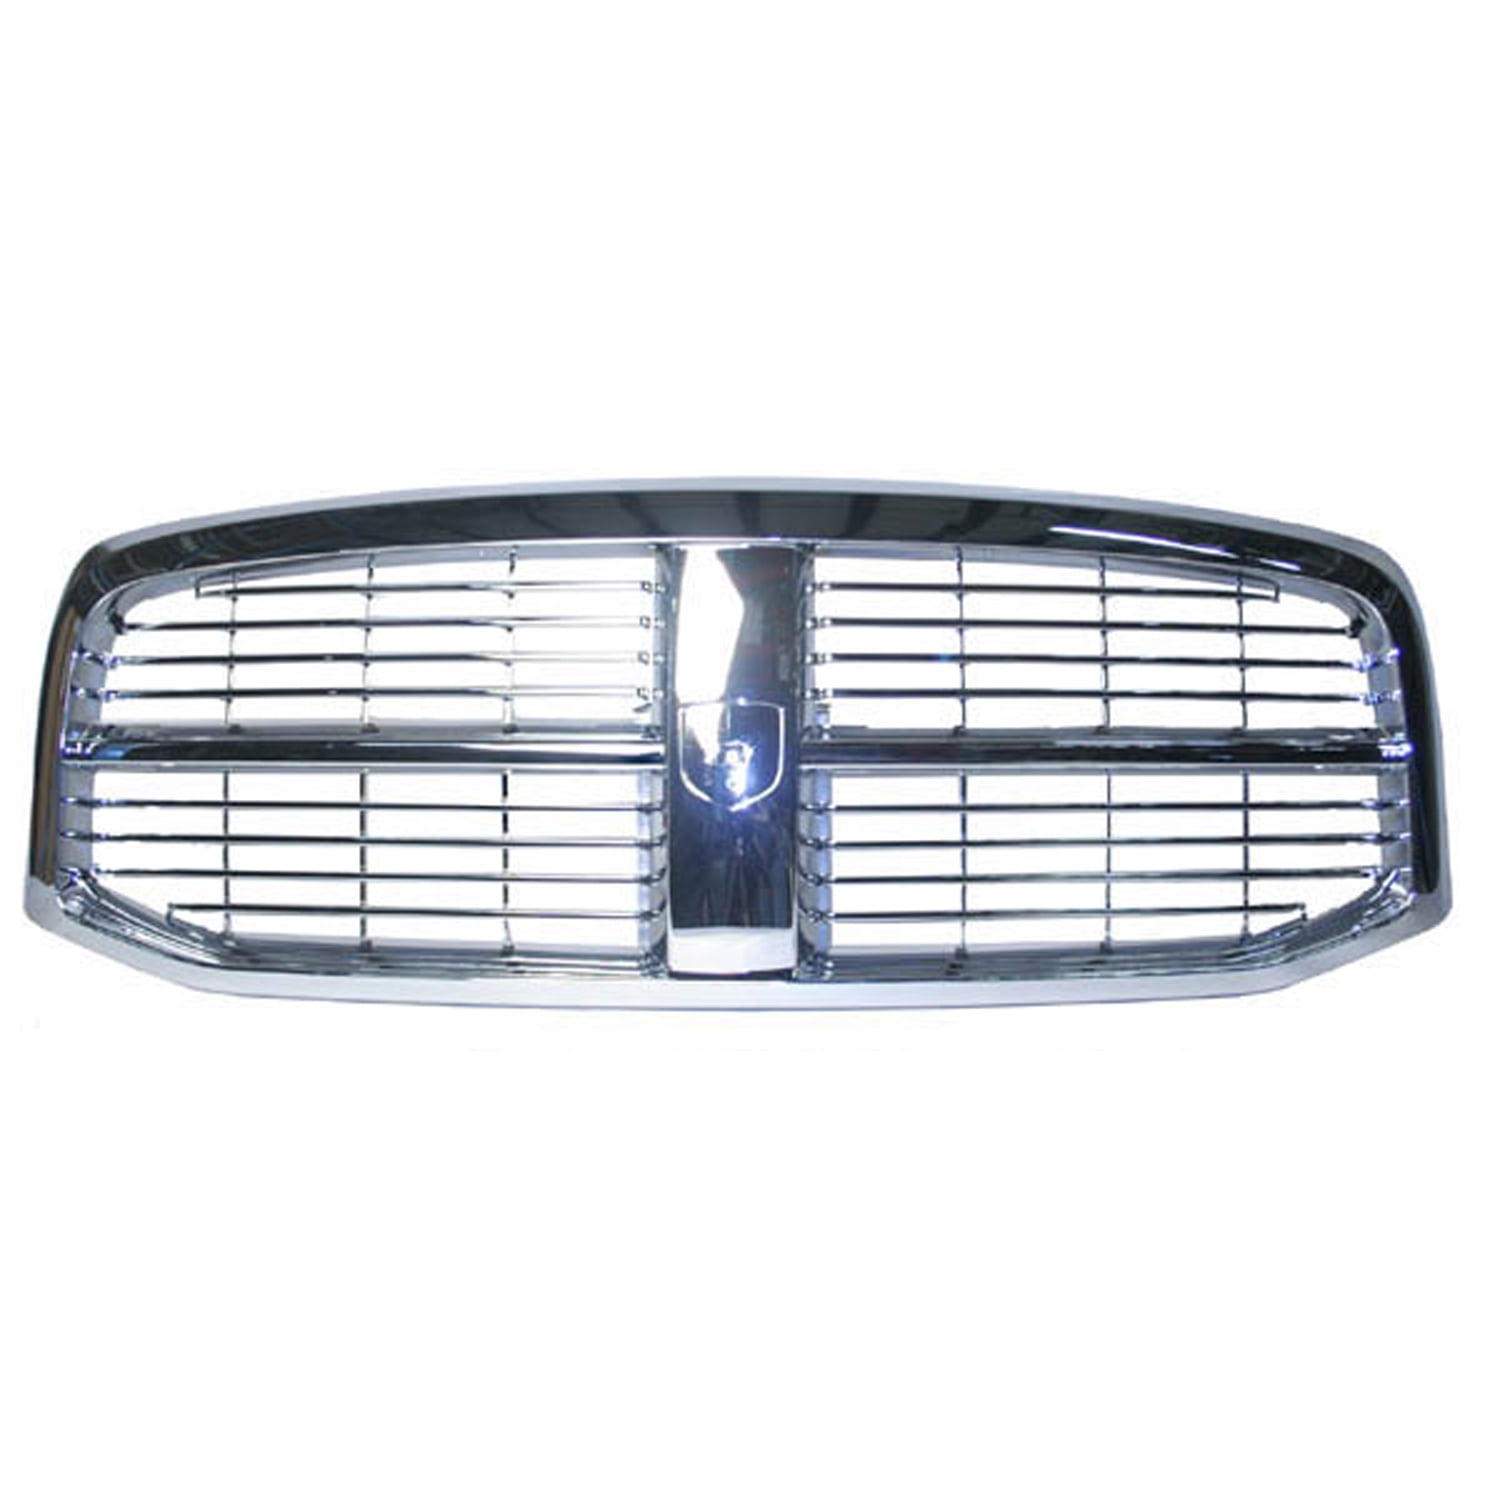 New Standard Replacement Front Grille, Fits 2006-2008 Dodge Ram 1500 - Walmart.com - Walmart.com 2008 Dodge Ram 1500 Front Grill Replacement